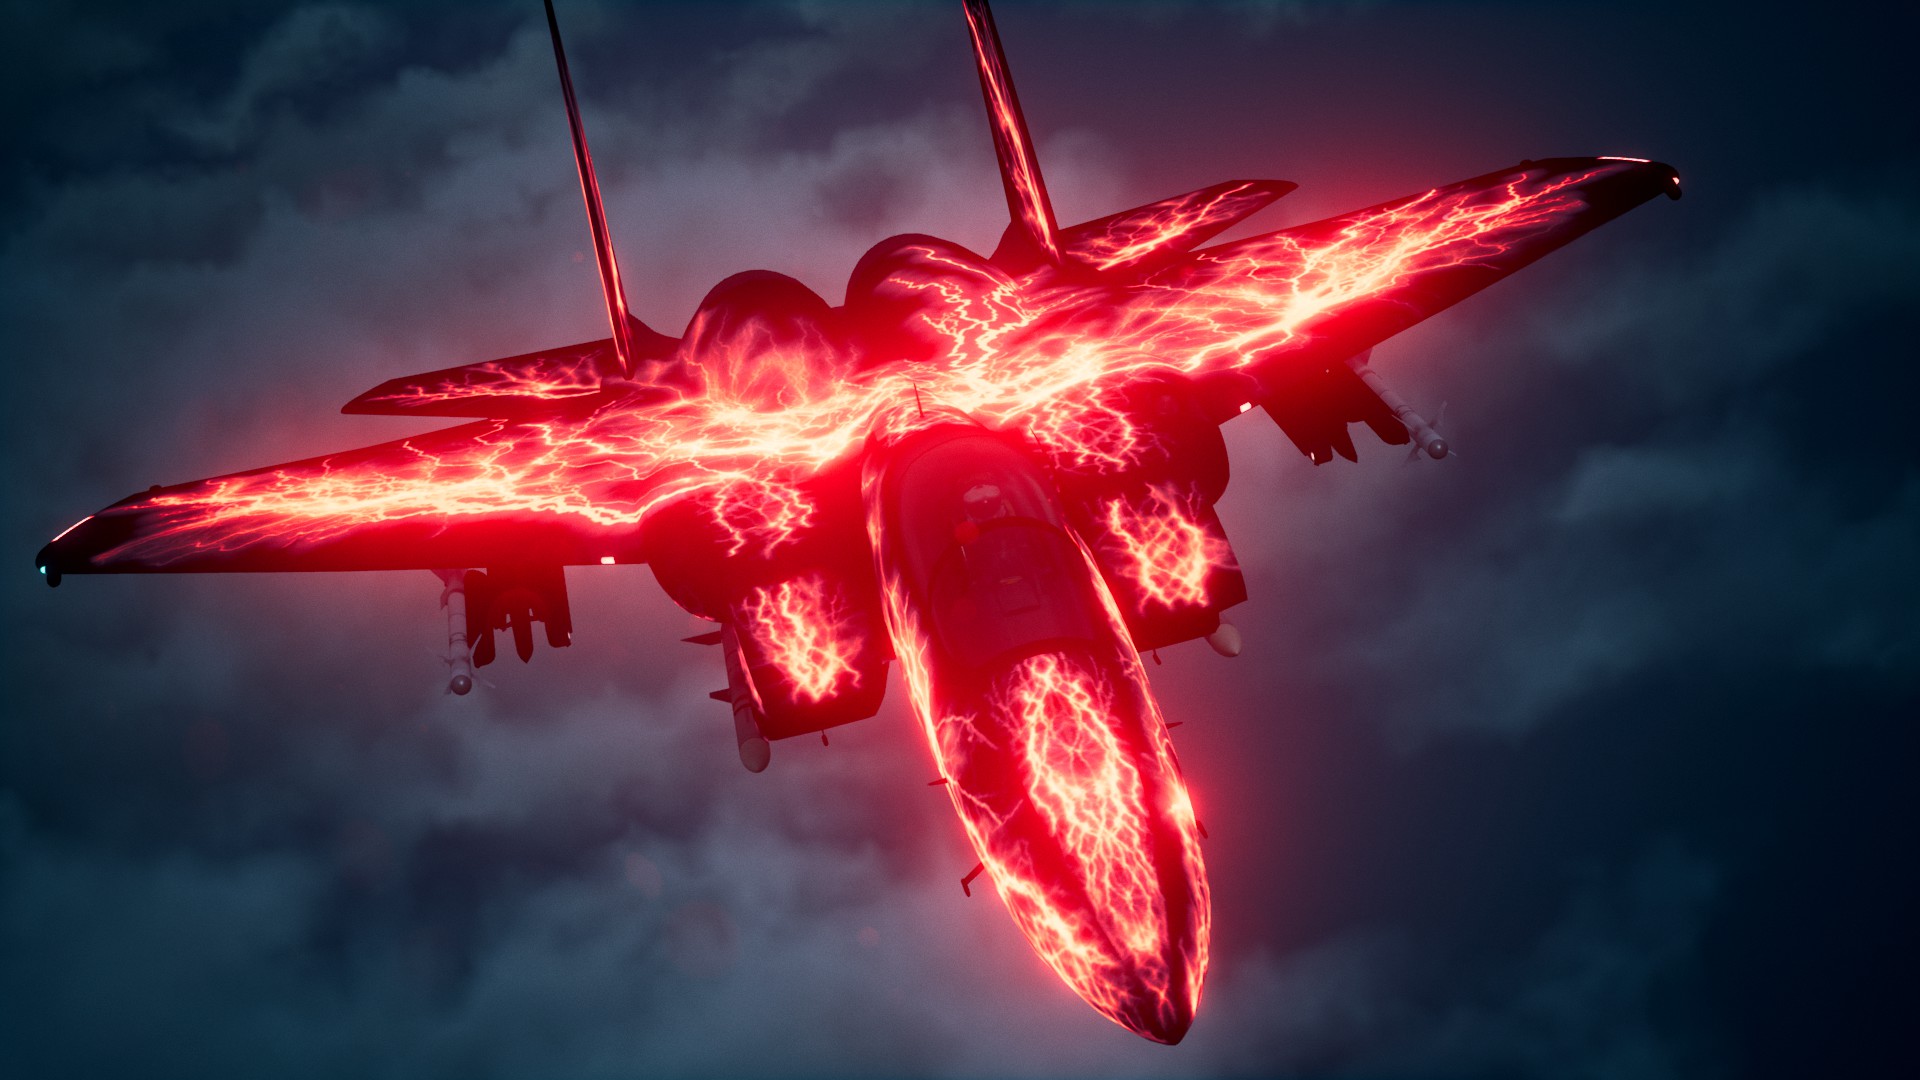 Ace Combat 7 – 15 Things You Need To Know Before You Buy